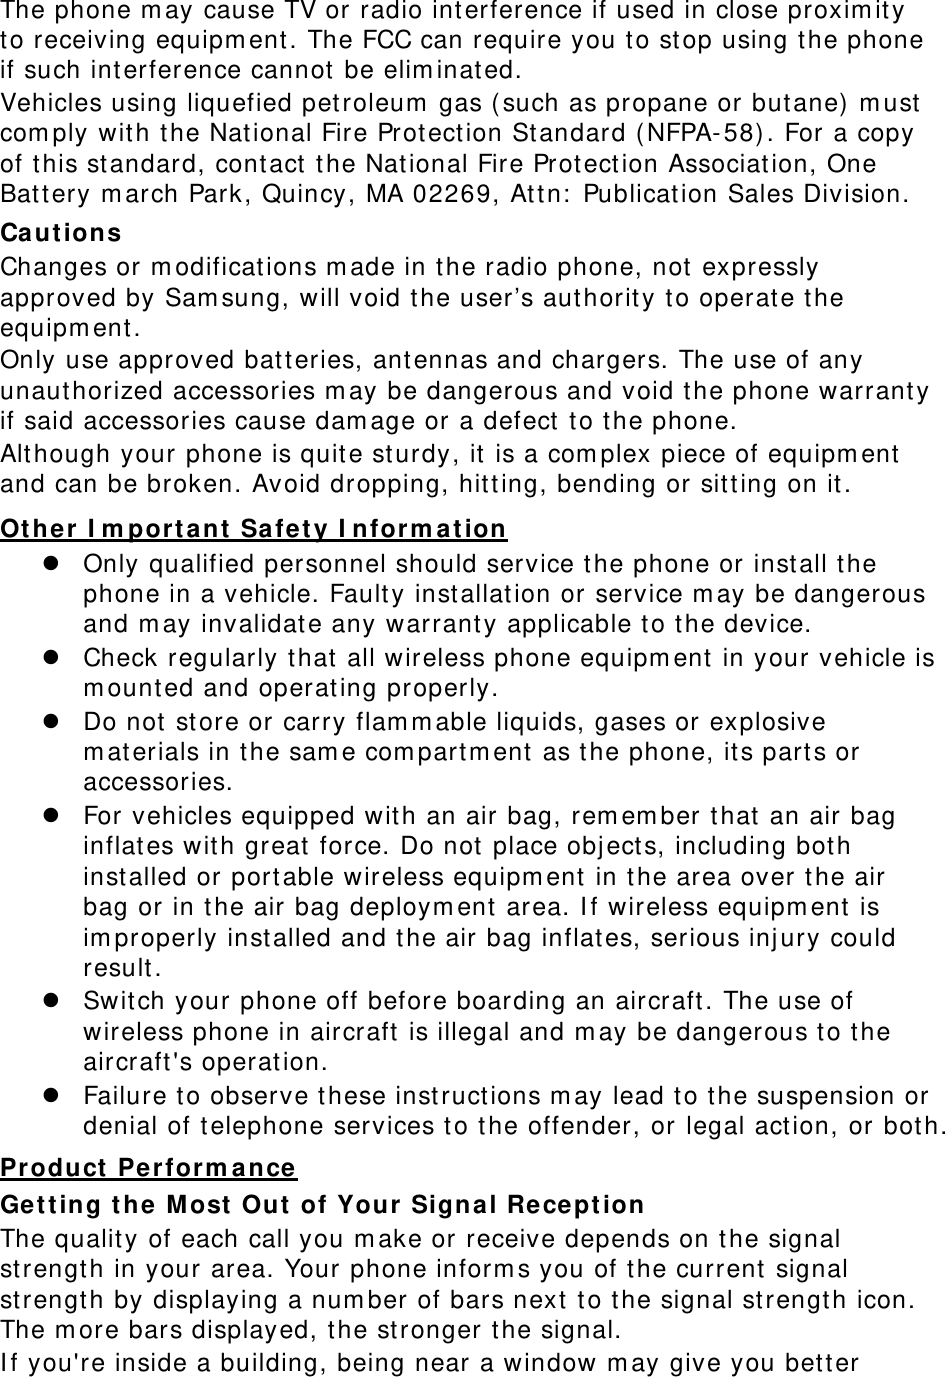  The phone m ay cause TV or radio interference if used in close proxim it y to receiving equipm ent . The FCC can require you to stop using the phone if such int erference cannot  be elim inat ed. Vehicles using liquefied pet roleum  gas ( such as propane or but ane)  m ust  com ply wit h t he National Fire Protect ion Standard (NFPA- 58). For a copy of this st andard, cont act  the Nat ional Fire Prot ect ion Associat ion, One Bat tery m arch Park, Quincy, MA 02269, At tn:  Publicat ion Sales Division. Ca ut ion s Changes or m odificat ions m ade in the radio phone, not  expressly approved by Sam sung, will void t he user’s aut horit y t o operat e t he equipm ent. Only use approved bat t eries, ant ennas and chargers. The use of any unauthorized accessories m ay be dangerous and void t he phone warrant y if said accessories cause dam age or a defect t o t he phone. Although your phone is quit e sturdy, it  is a com plex piece of equipm ent  and can be broken. Avoid dropping, hit t ing, bending or sit t ing on it. Other I m porta nt  Safe t y I nform a t ion  Only qualified personnel should service the phone or install t he phone in a vehicle. Fault y installat ion or service m ay be dangerous and m ay invalidat e any warrant y applicable t o the device.  Check regularly t hat  all wireless phone equipm ent  in your vehicle is m ount ed and operating properly.  Do not  st ore or carry flam m able liquids, gases or explosive m aterials in t he sam e com part m ent  as t he phone, it s parts or accessories.  For vehicles equipped with an air bag, rem em ber that  an air bag inflat es wit h great  force. Do not  place objects, including both installed or portable wireless equipm ent in t he area over t he air bag or in the air bag deploym ent  area. I f wireless equipm ent is im properly installed and t he air bag inflates, serious inj ury could result .  Swit ch your phone off before boarding an aircraft . The use of wireless phone in aircraft is illegal and m ay be dangerous t o the aircraft&apos;s operation.  Failure t o observe t hese instruct ions m ay lead to t he suspension or denial of t elephone services to t he offender, or legal act ion, or bot h. Pr oduct  Pe r form ance Get ting t he M ost  Out  of Your Signal Re cept ion The quality of each call you m ake or receive depends on t he signal strength in your area. Your phone inform s you of t he current  signal strength by displaying a num ber of bars next t o t he signal st rength icon. The m ore bars displayed, t he st ronger the signal. I f you&apos;re inside a building, being near a window m ay give you bet t er 